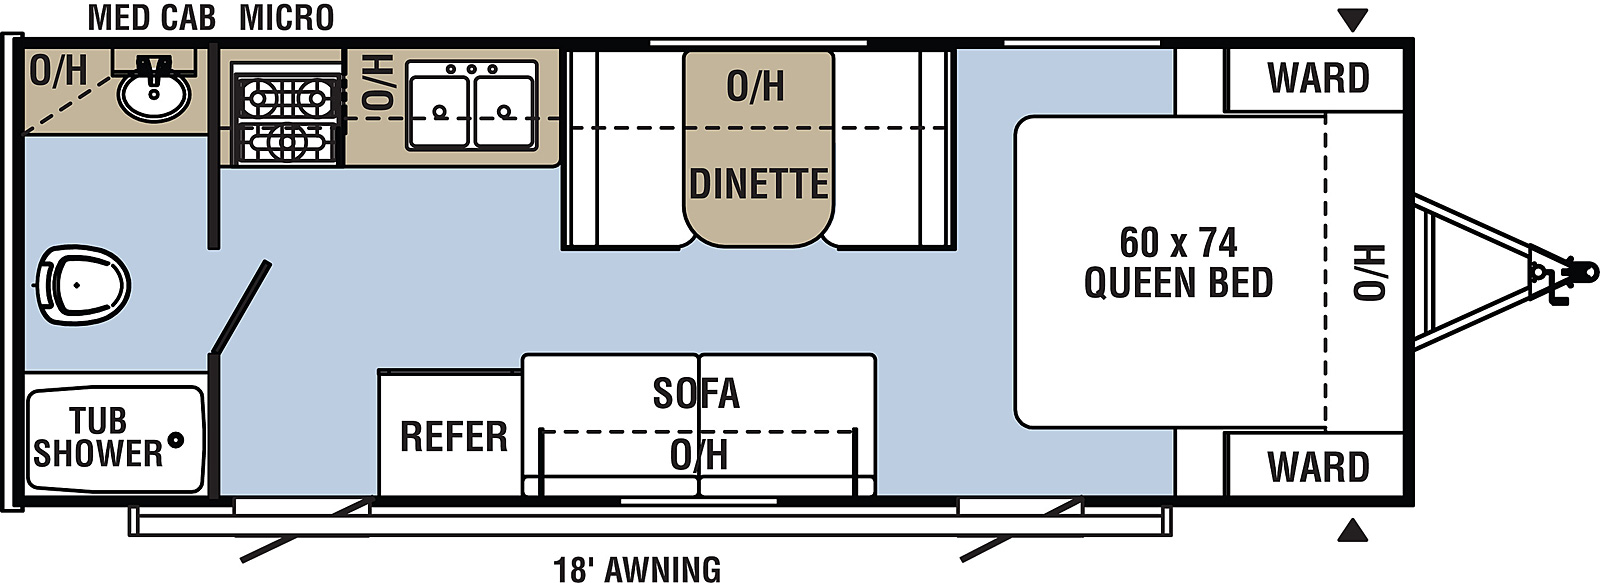 Clipper Ultra-Lite 21CFQ floorplan. The 21CFQ has no slide outs and two plus entry doors.